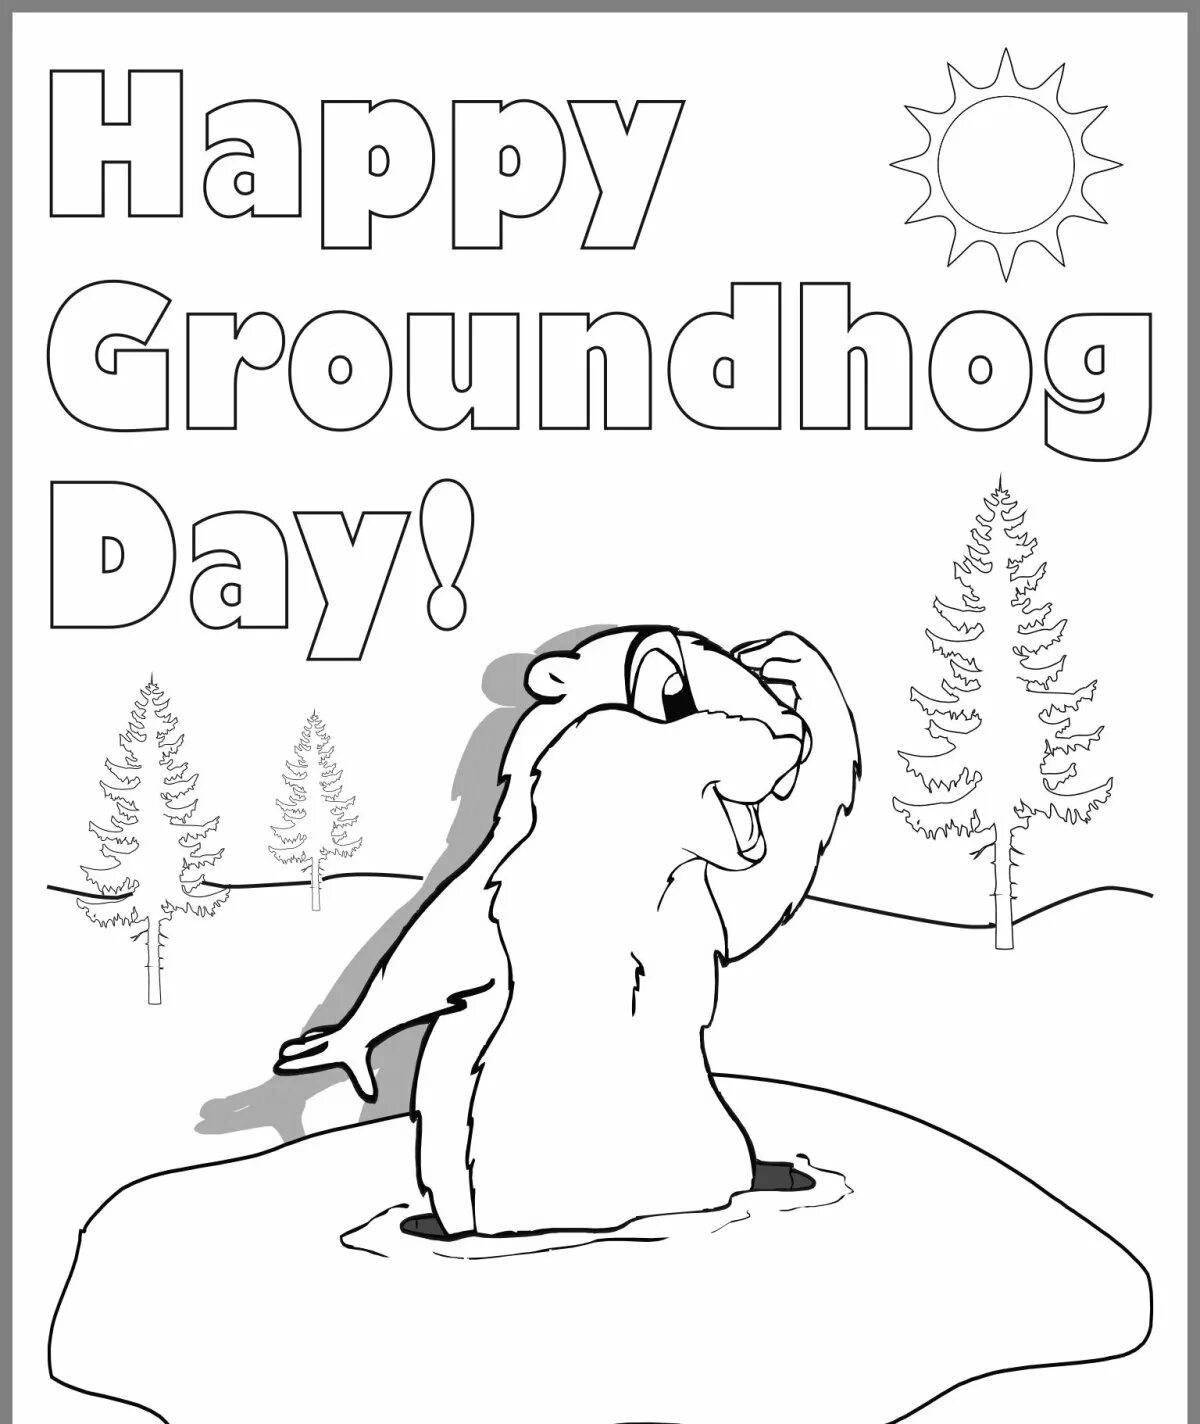 Colorful groundhog day coloring book